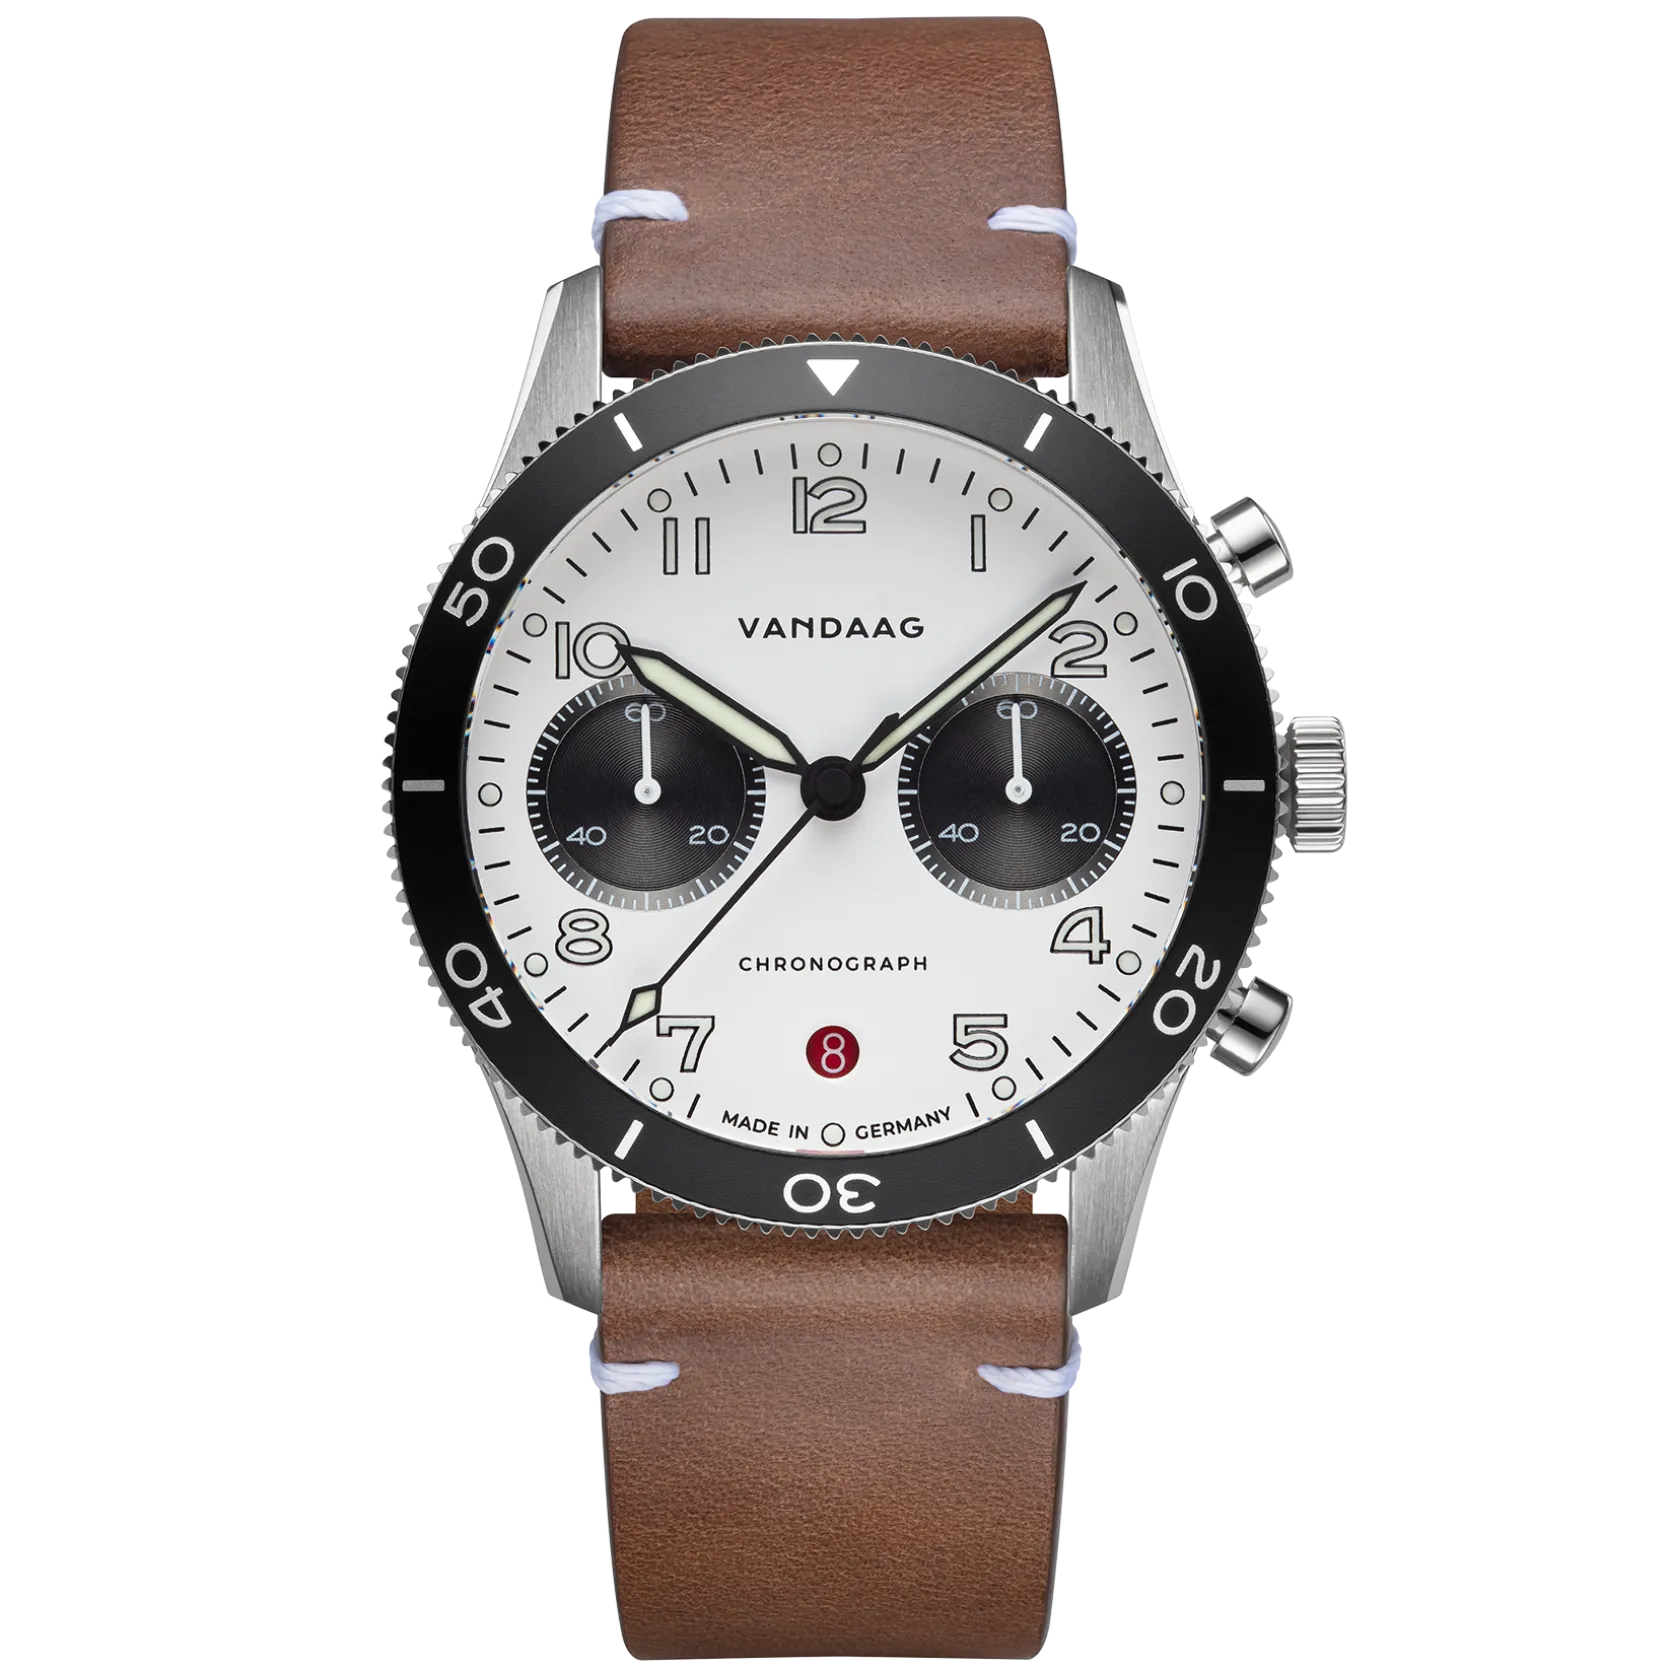 Leather strap in light brown, steel buckle